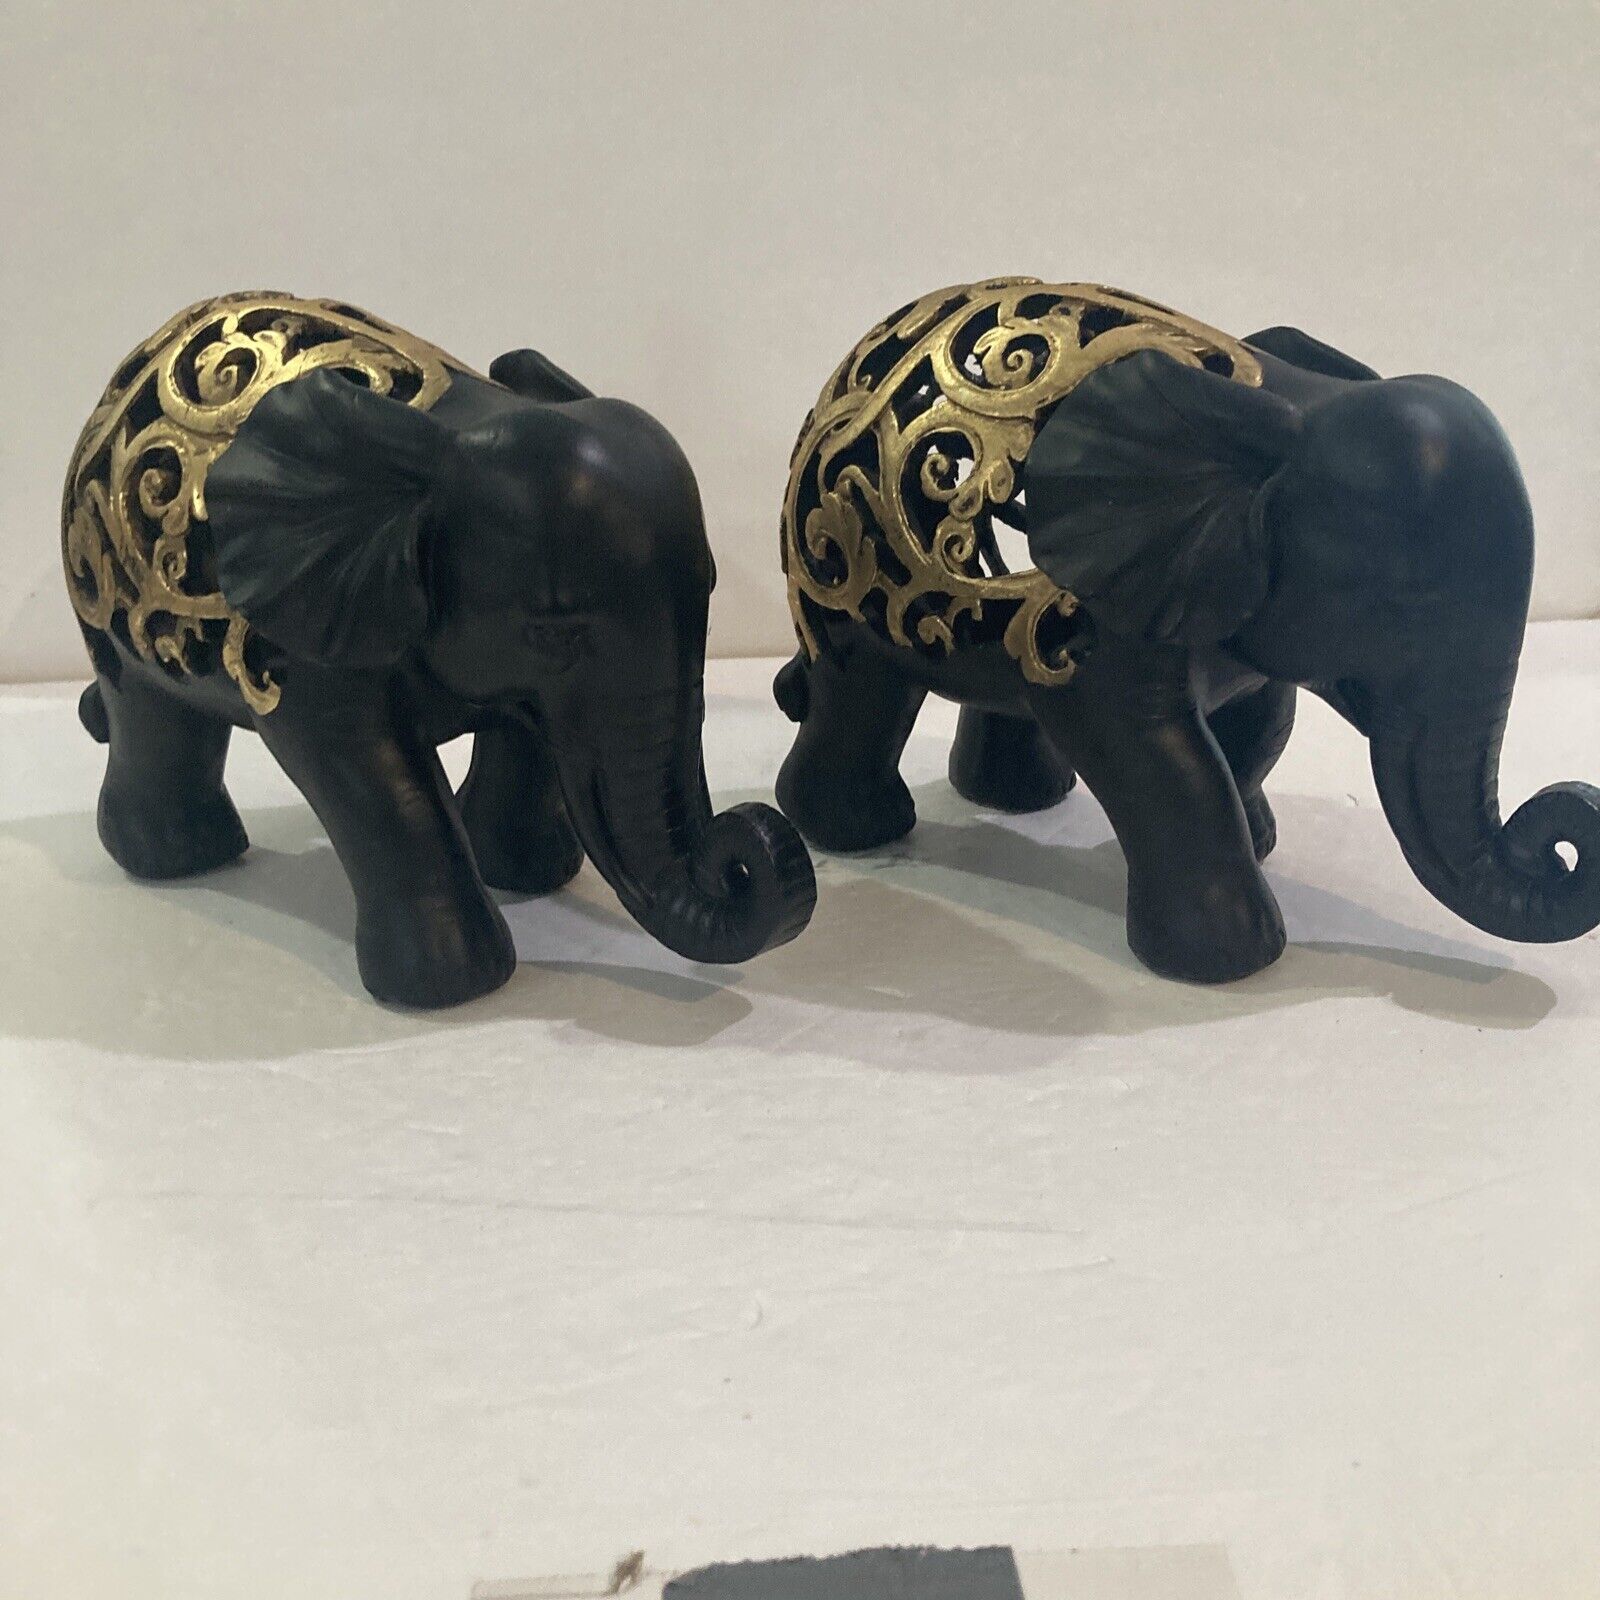 Two Elephant Table Accent Figures. 6” Tall and 10” Long.